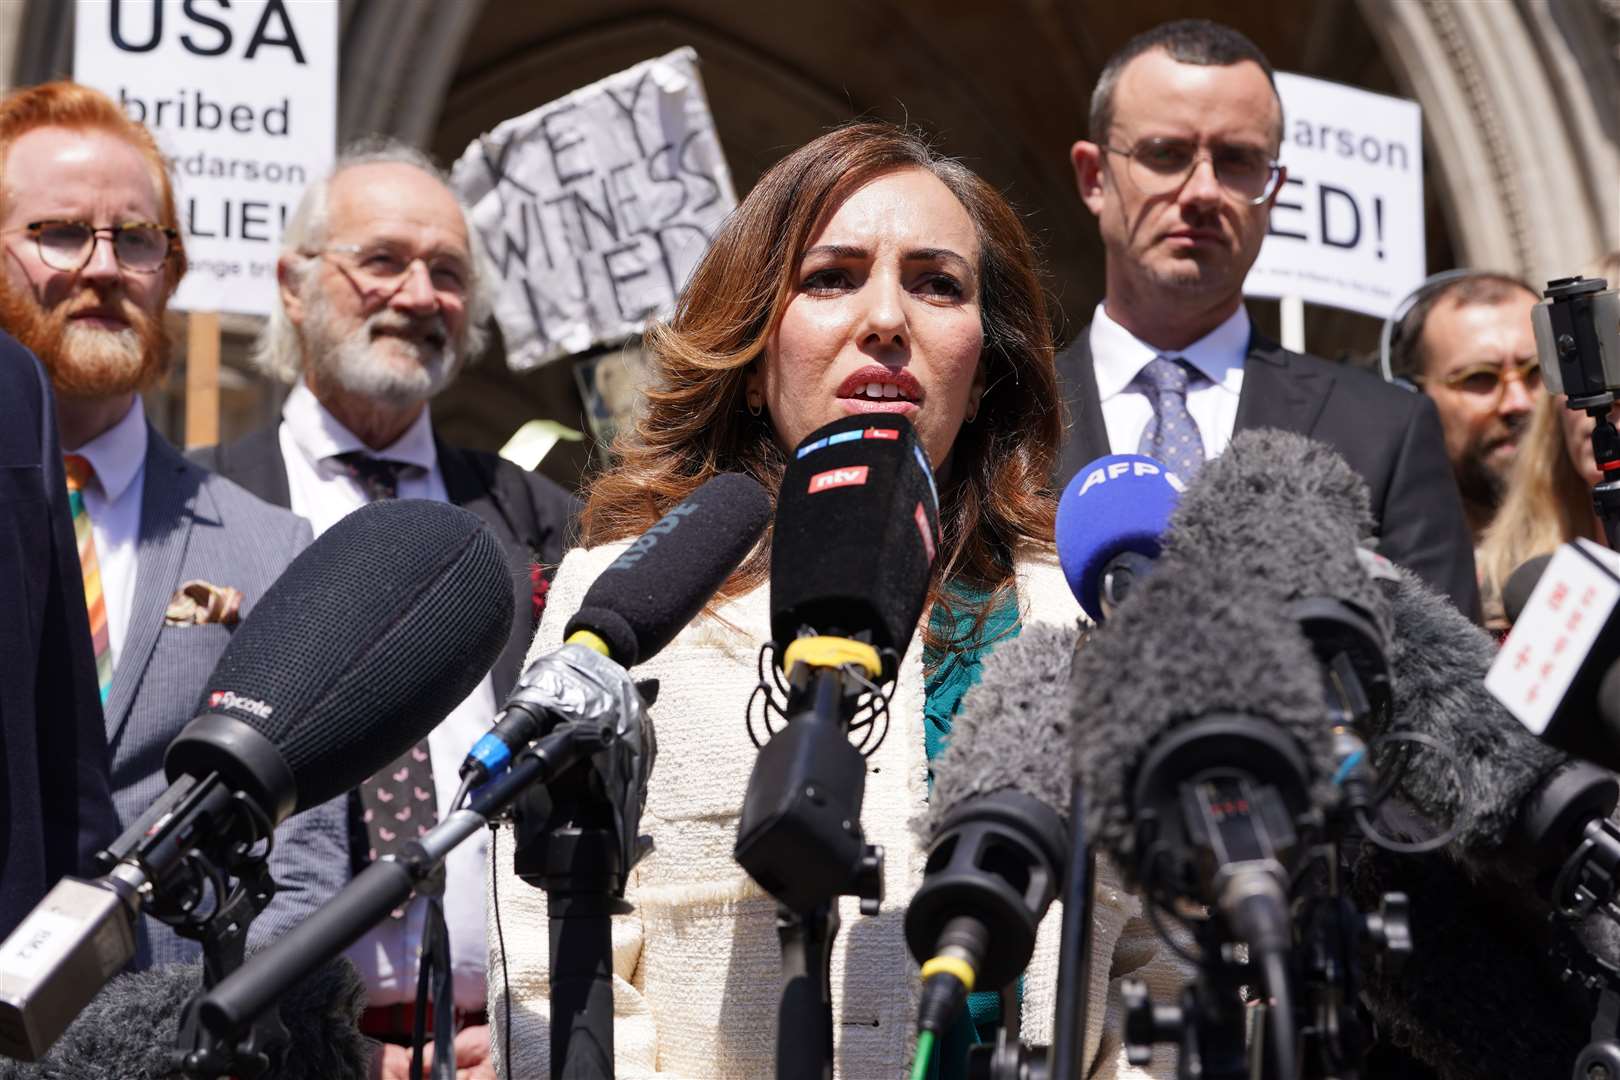 Stella Assange, wife of Julian Assange, giving a statement outside the Royal Courts of Justice in London (Lucy North/PA)